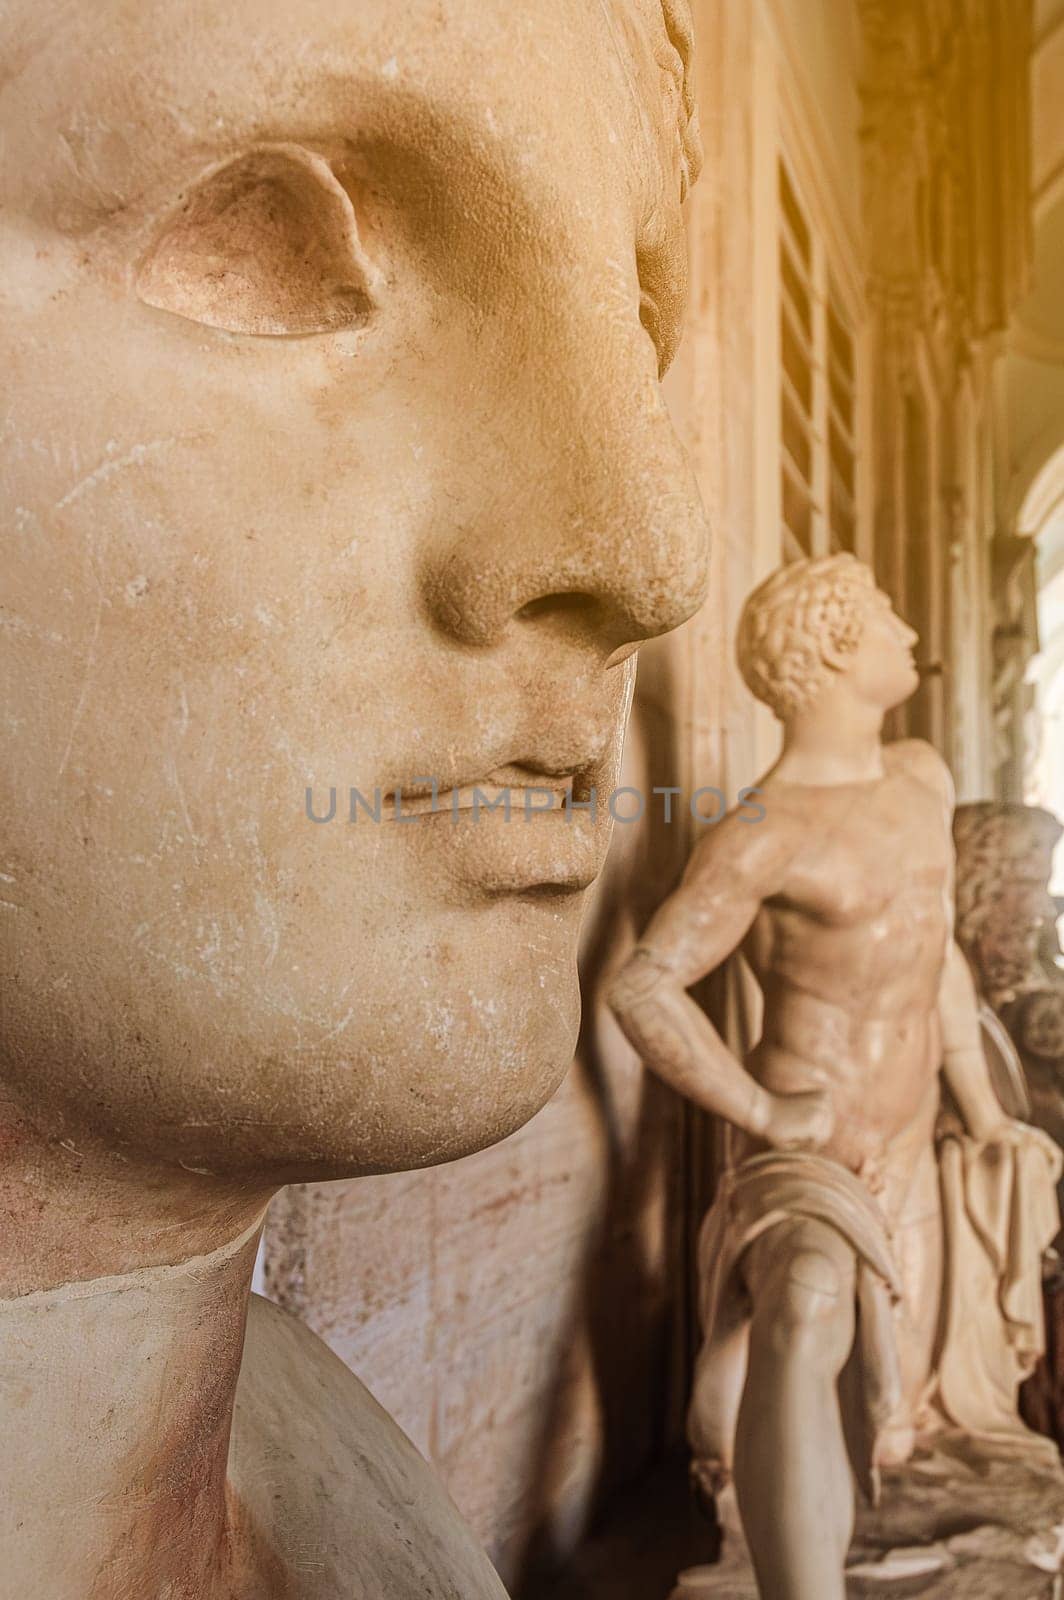 Rome, Italy, august 12, 2008: Statues in the Capitoline Museums of Rome